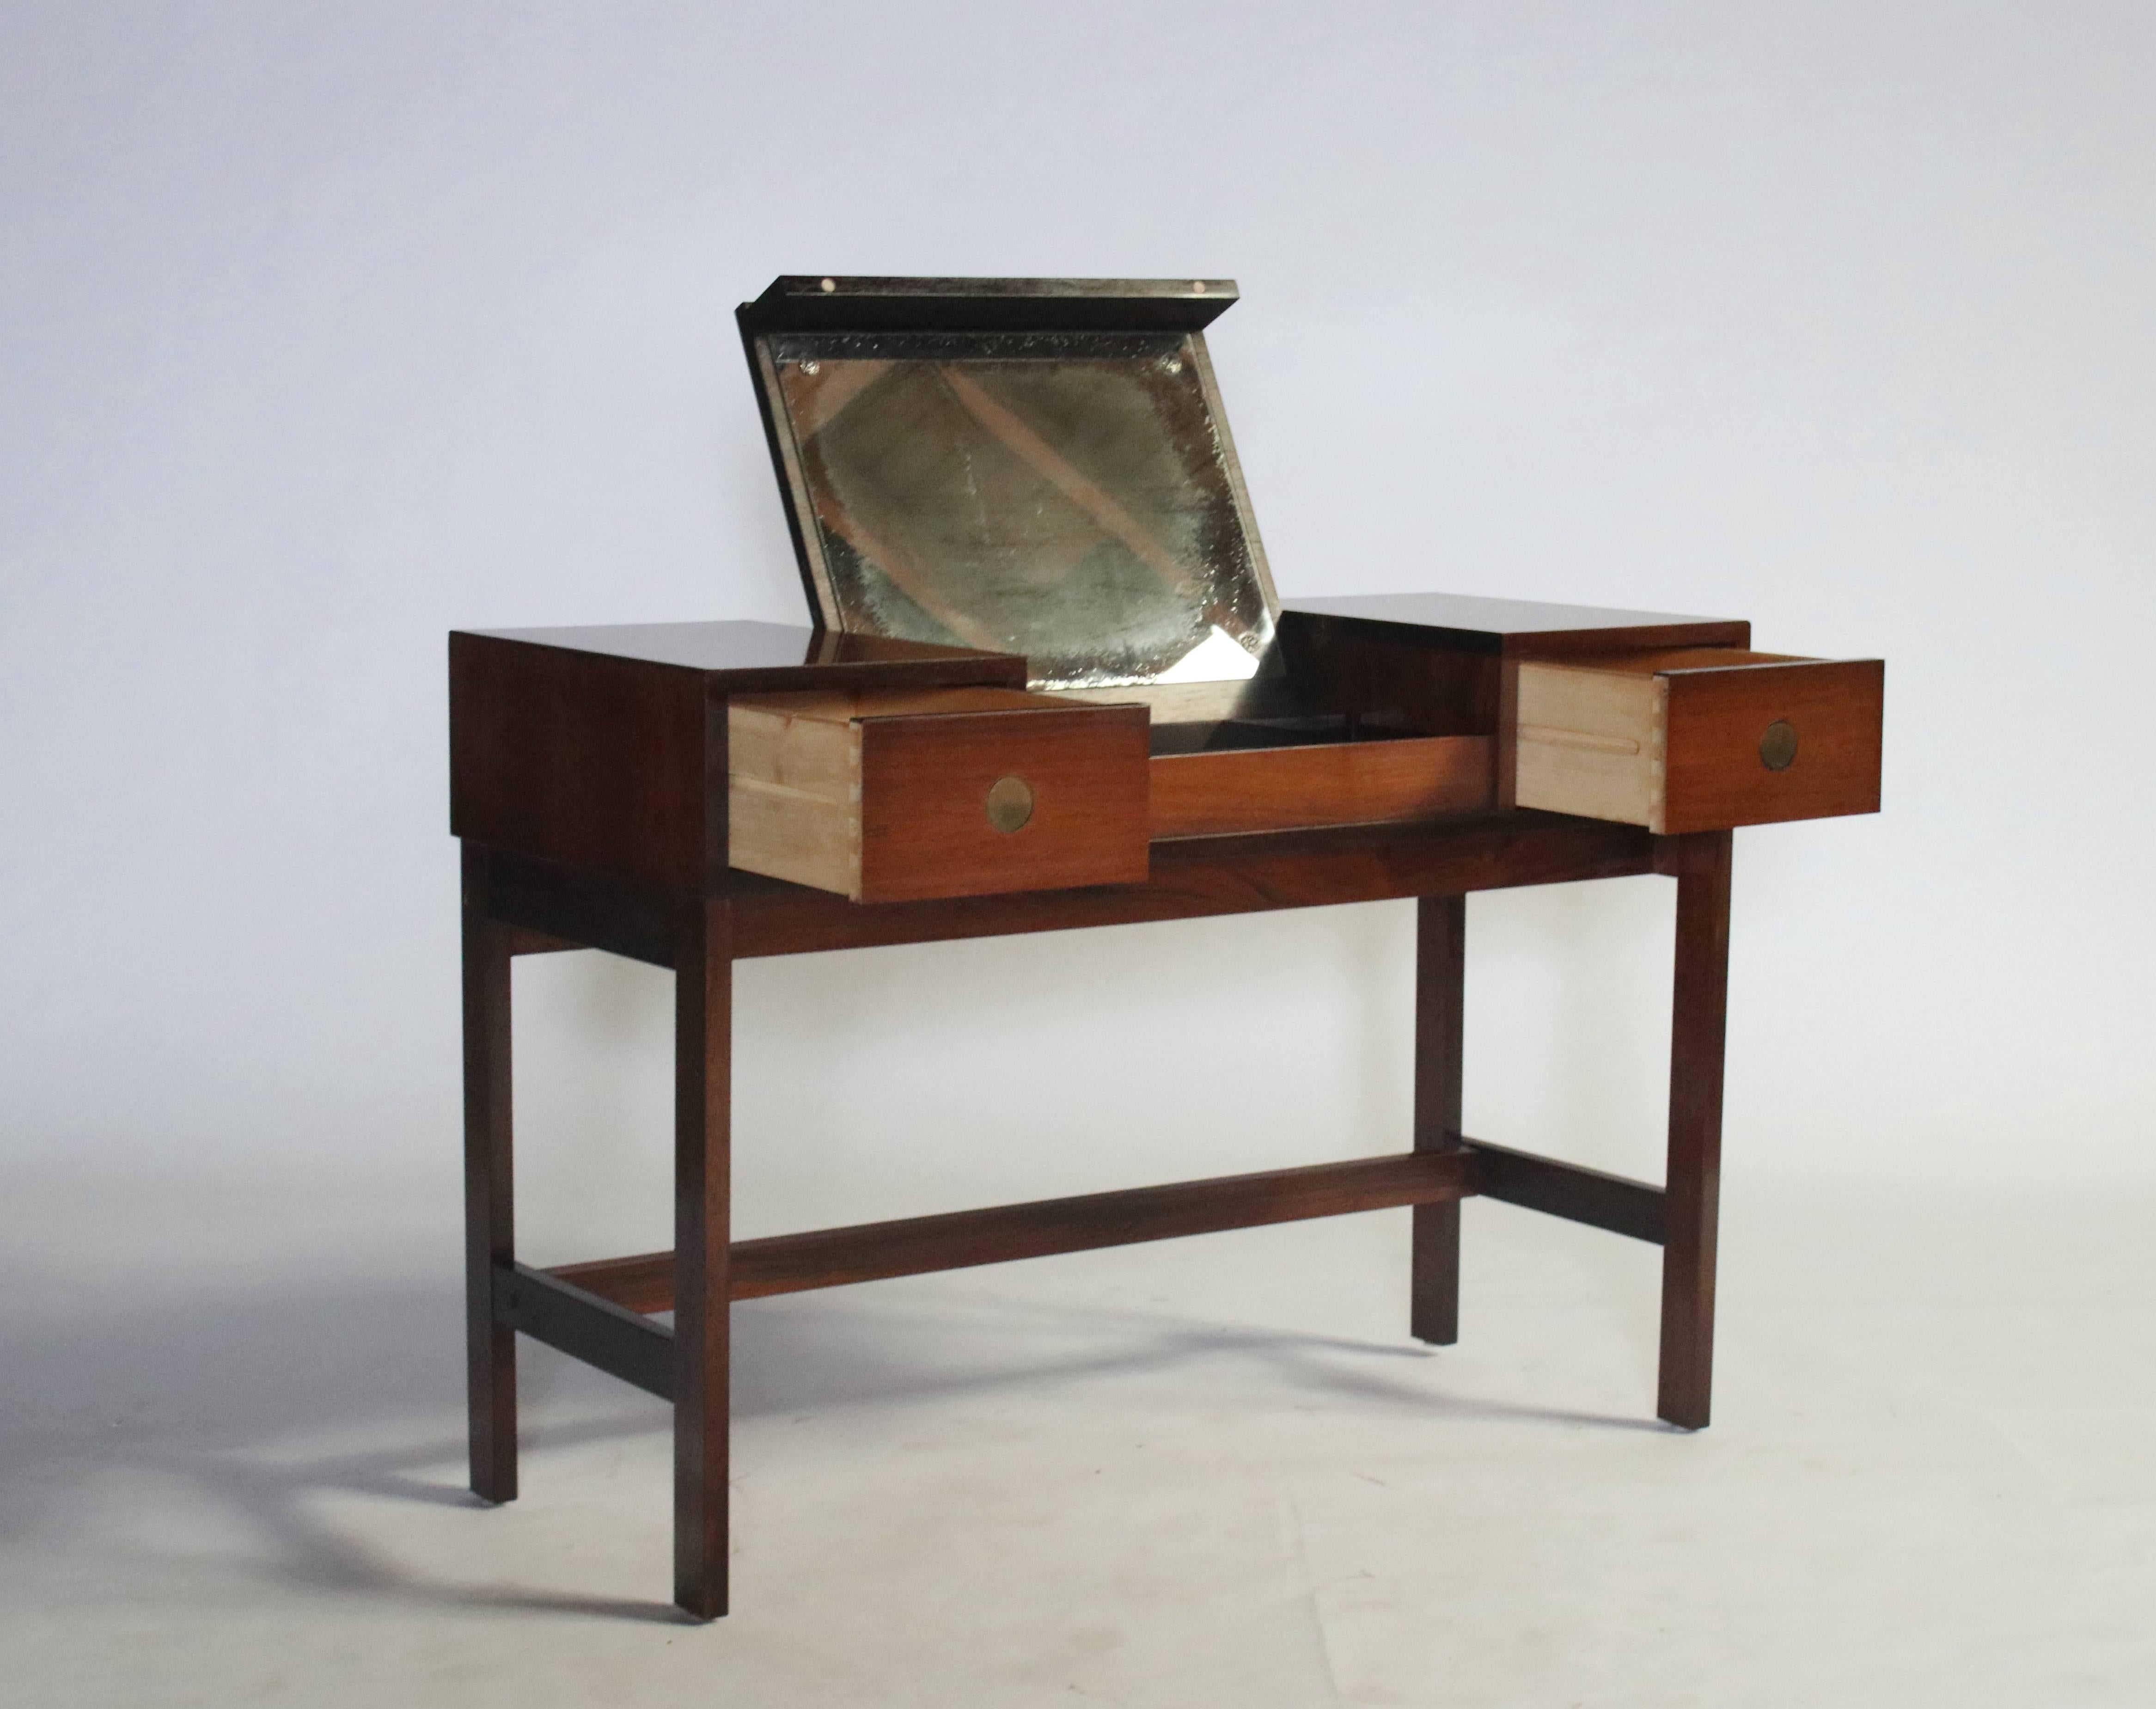 Midcentury rosewood vanity by Drylund, Denmark features a lift-up drawer revealing a make-up mirror and compartments for storage. Two pull-out drawers provide for additional storage.